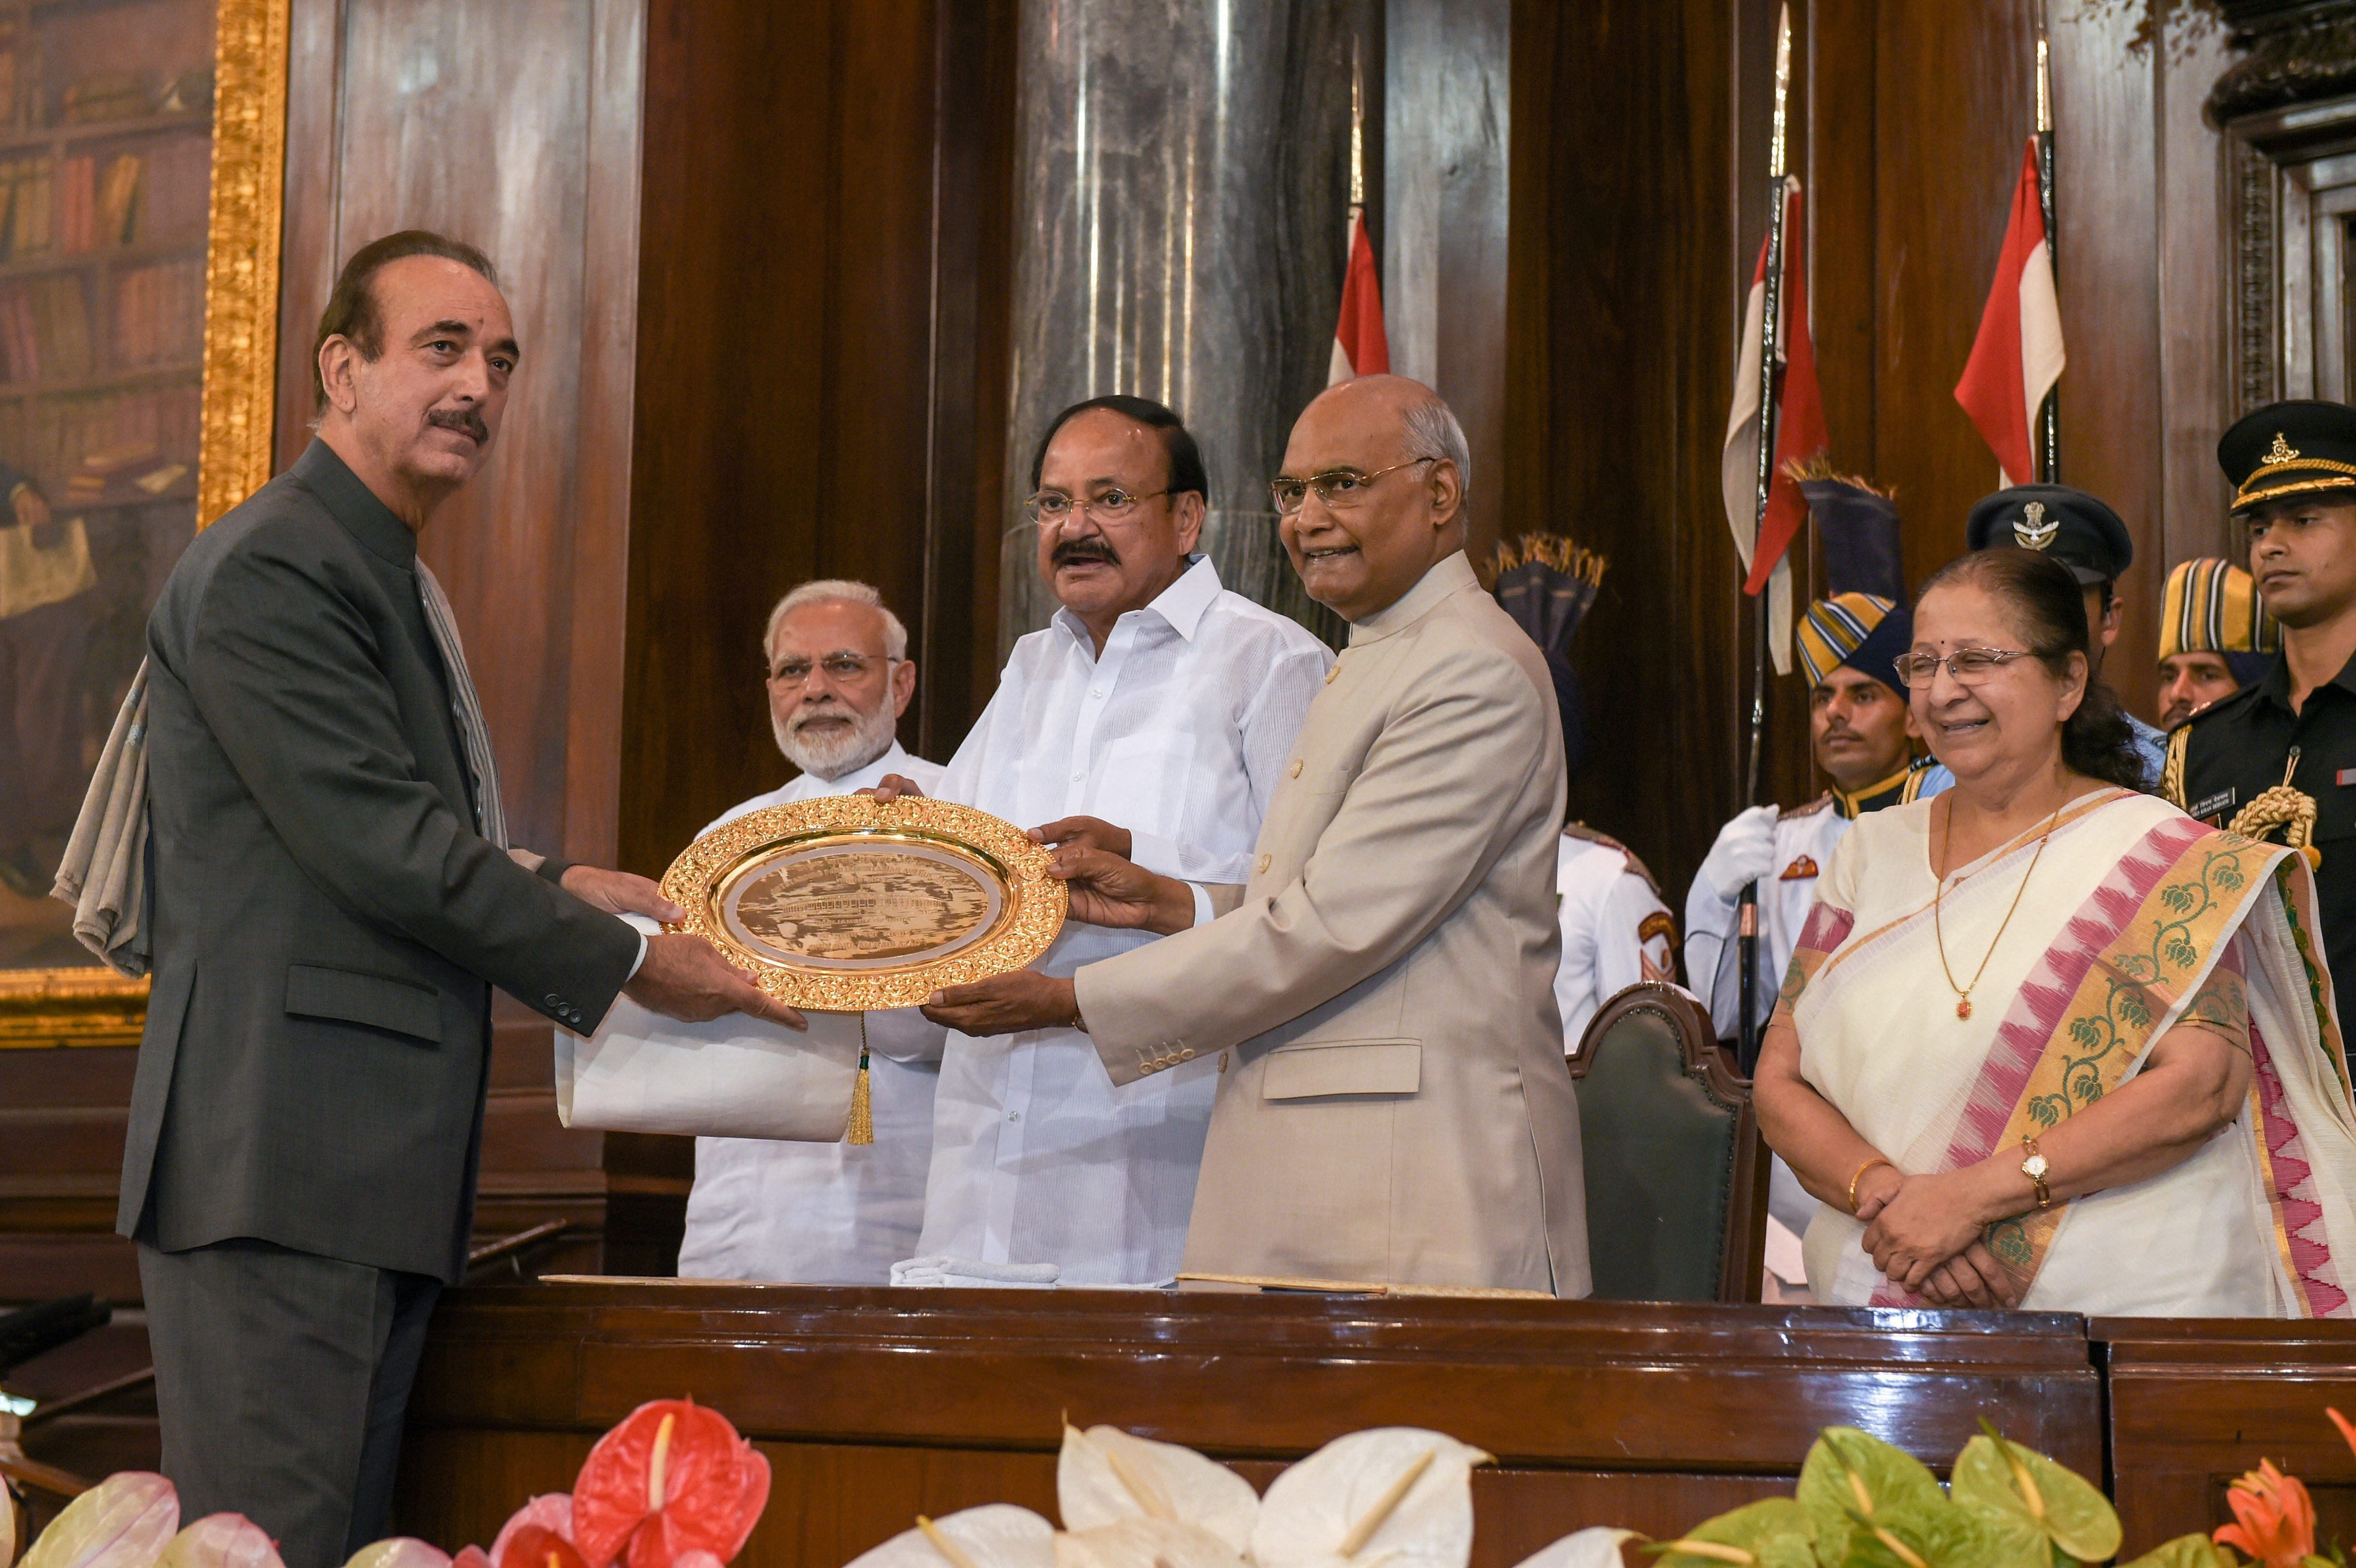 President Ram Nath Kovind confers Outstanding Parliamentarian Award for 2015 to Leader of Opposition in the Rajya Sabha Ghulam Nabi Azad as Vice-President Venkaiah Naidu, Prime Minister Narendra Modi and Lok Sabha Speaker Sumitra Mahajan look on, at the Central Hall of Parliament House, in New Delhi on Wednesday.  PTI